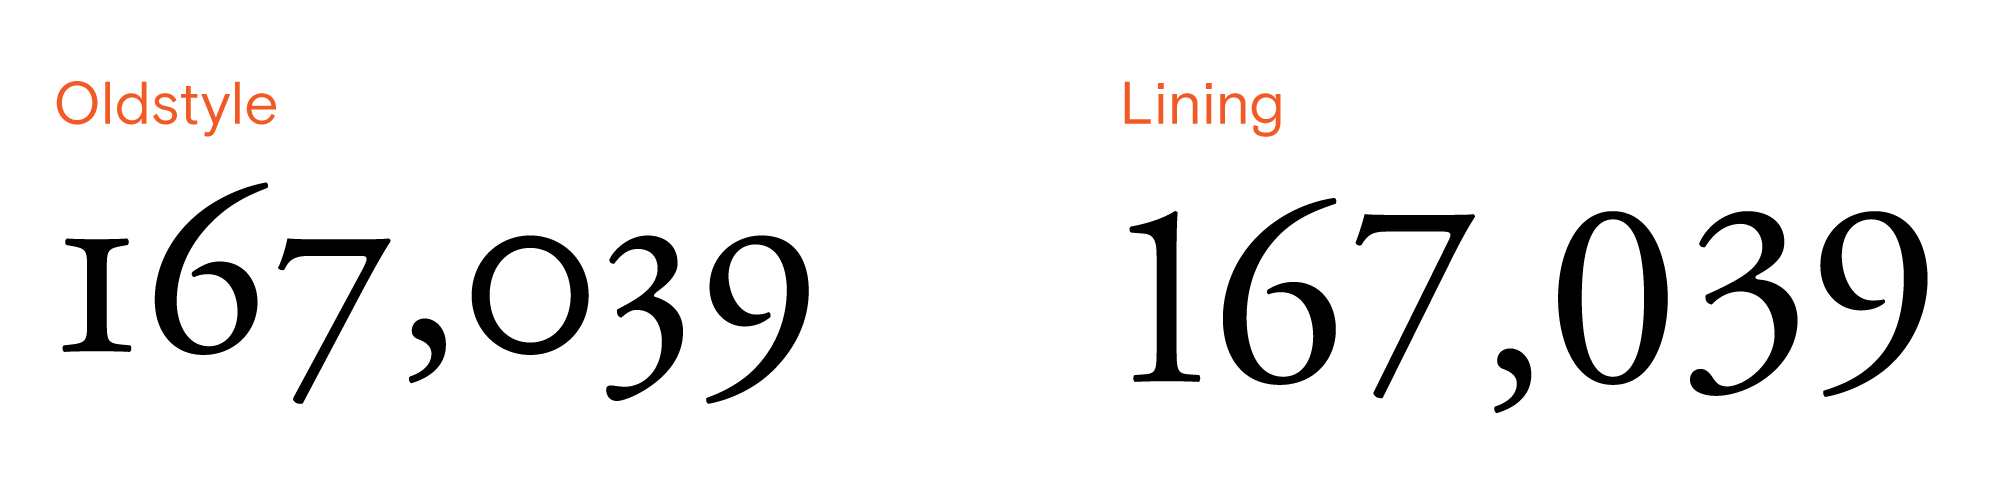 Oldstyle vs. lining figures